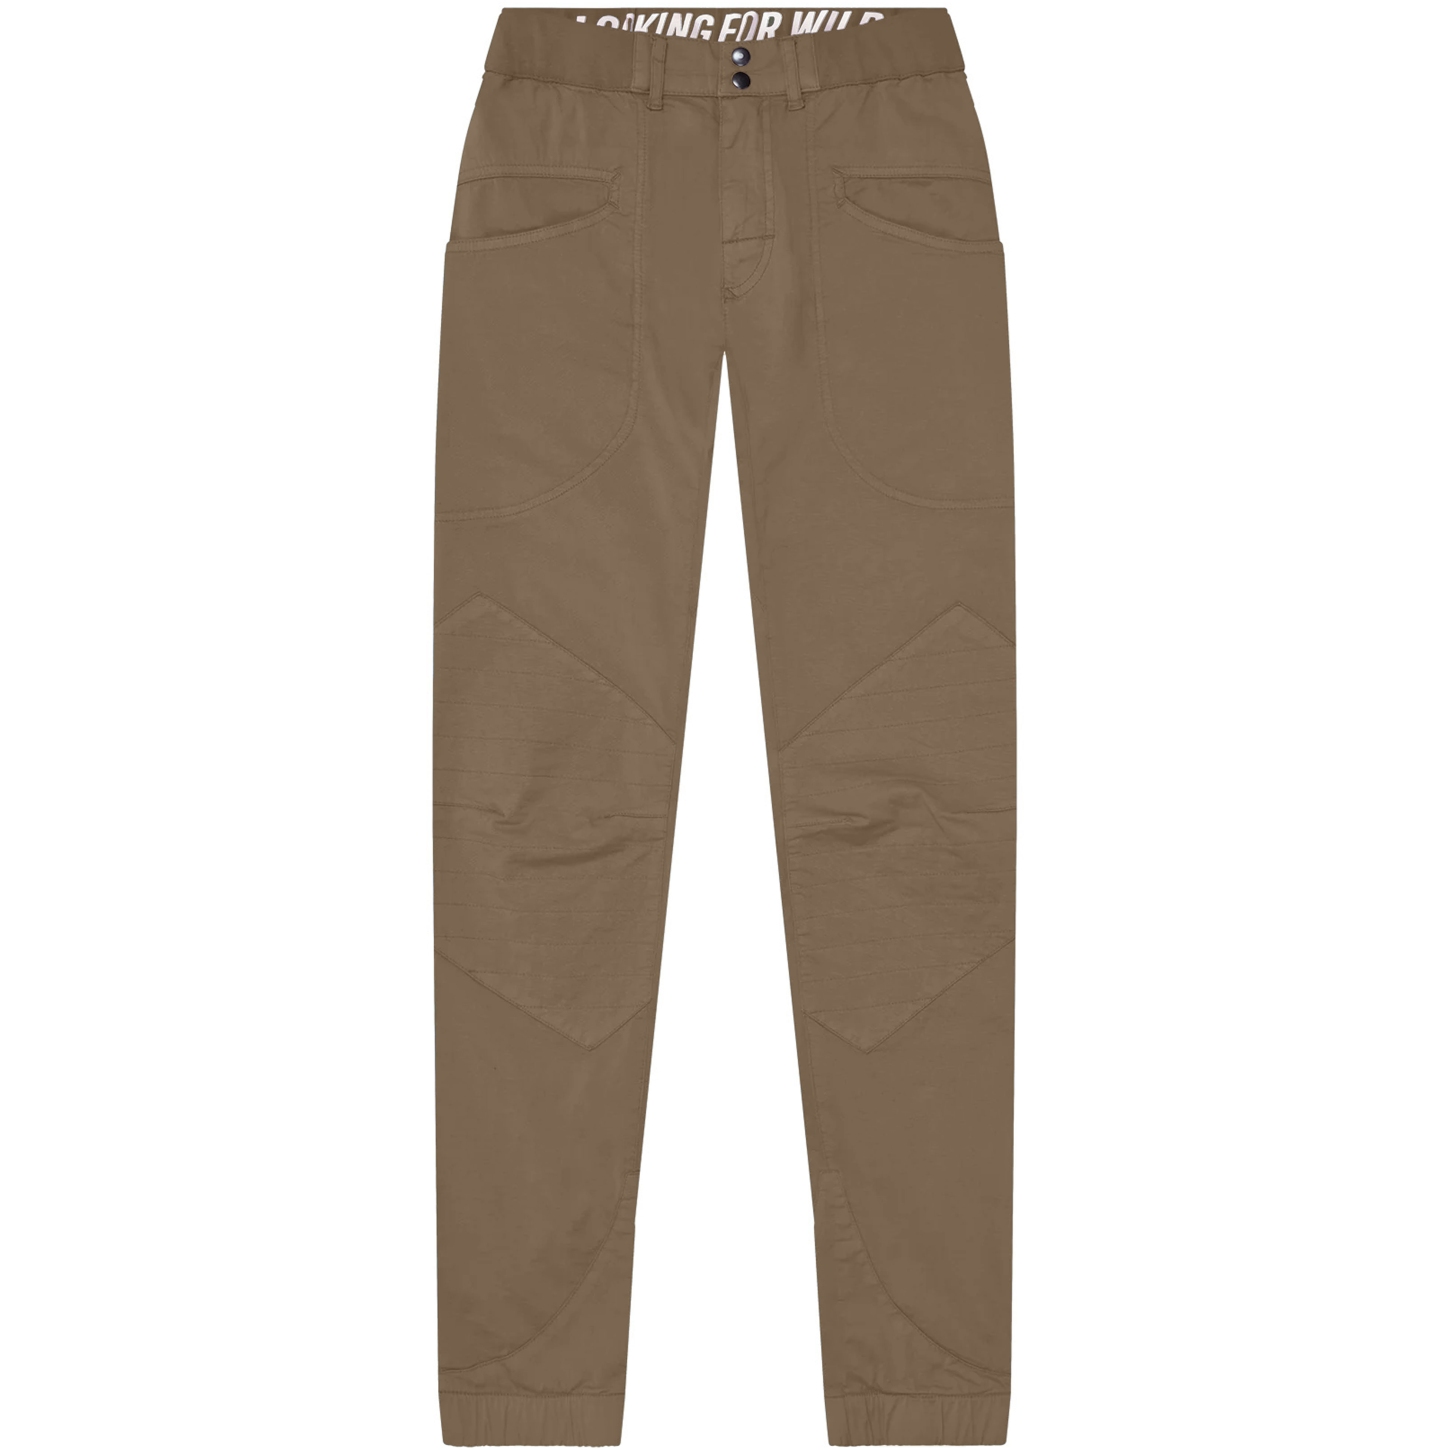 Picture of LOOKING FOR WILD Fitz Roy Men&#039;s Pants - Sepia Tint